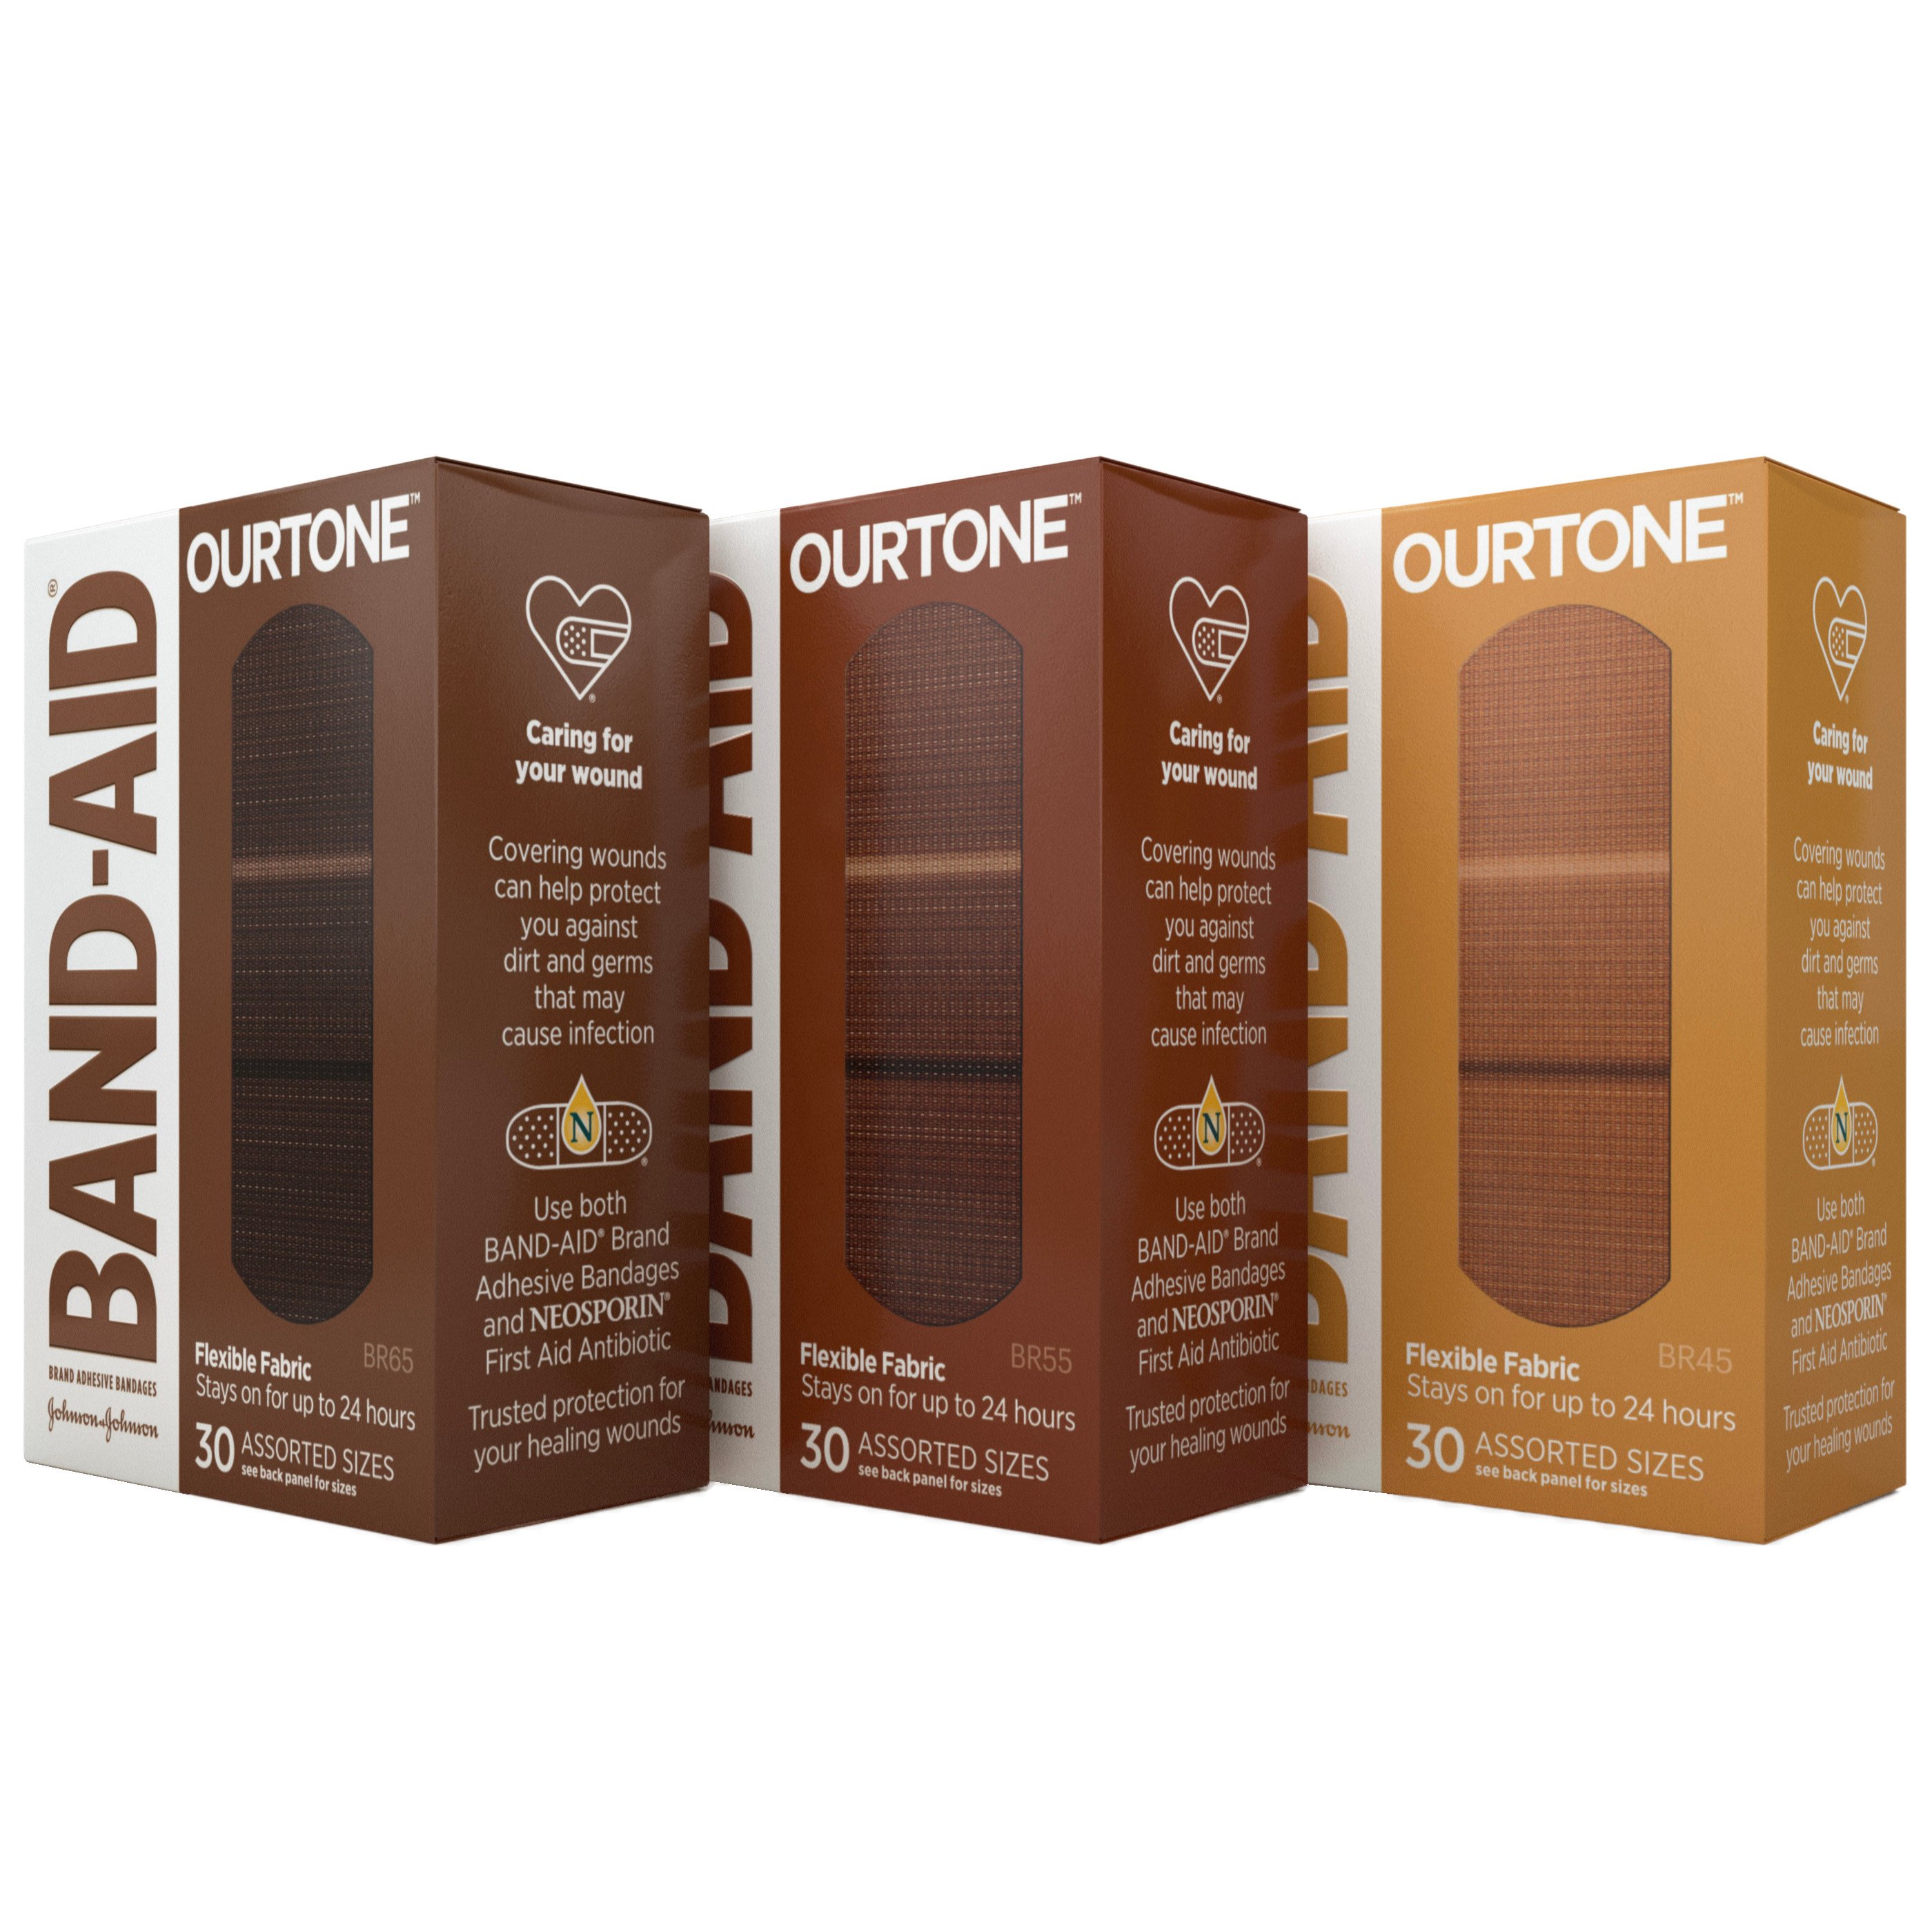 Band-Aid Brand Ourtone Flexible Fabric Adhesive Bandages 30 Piece Assortment 